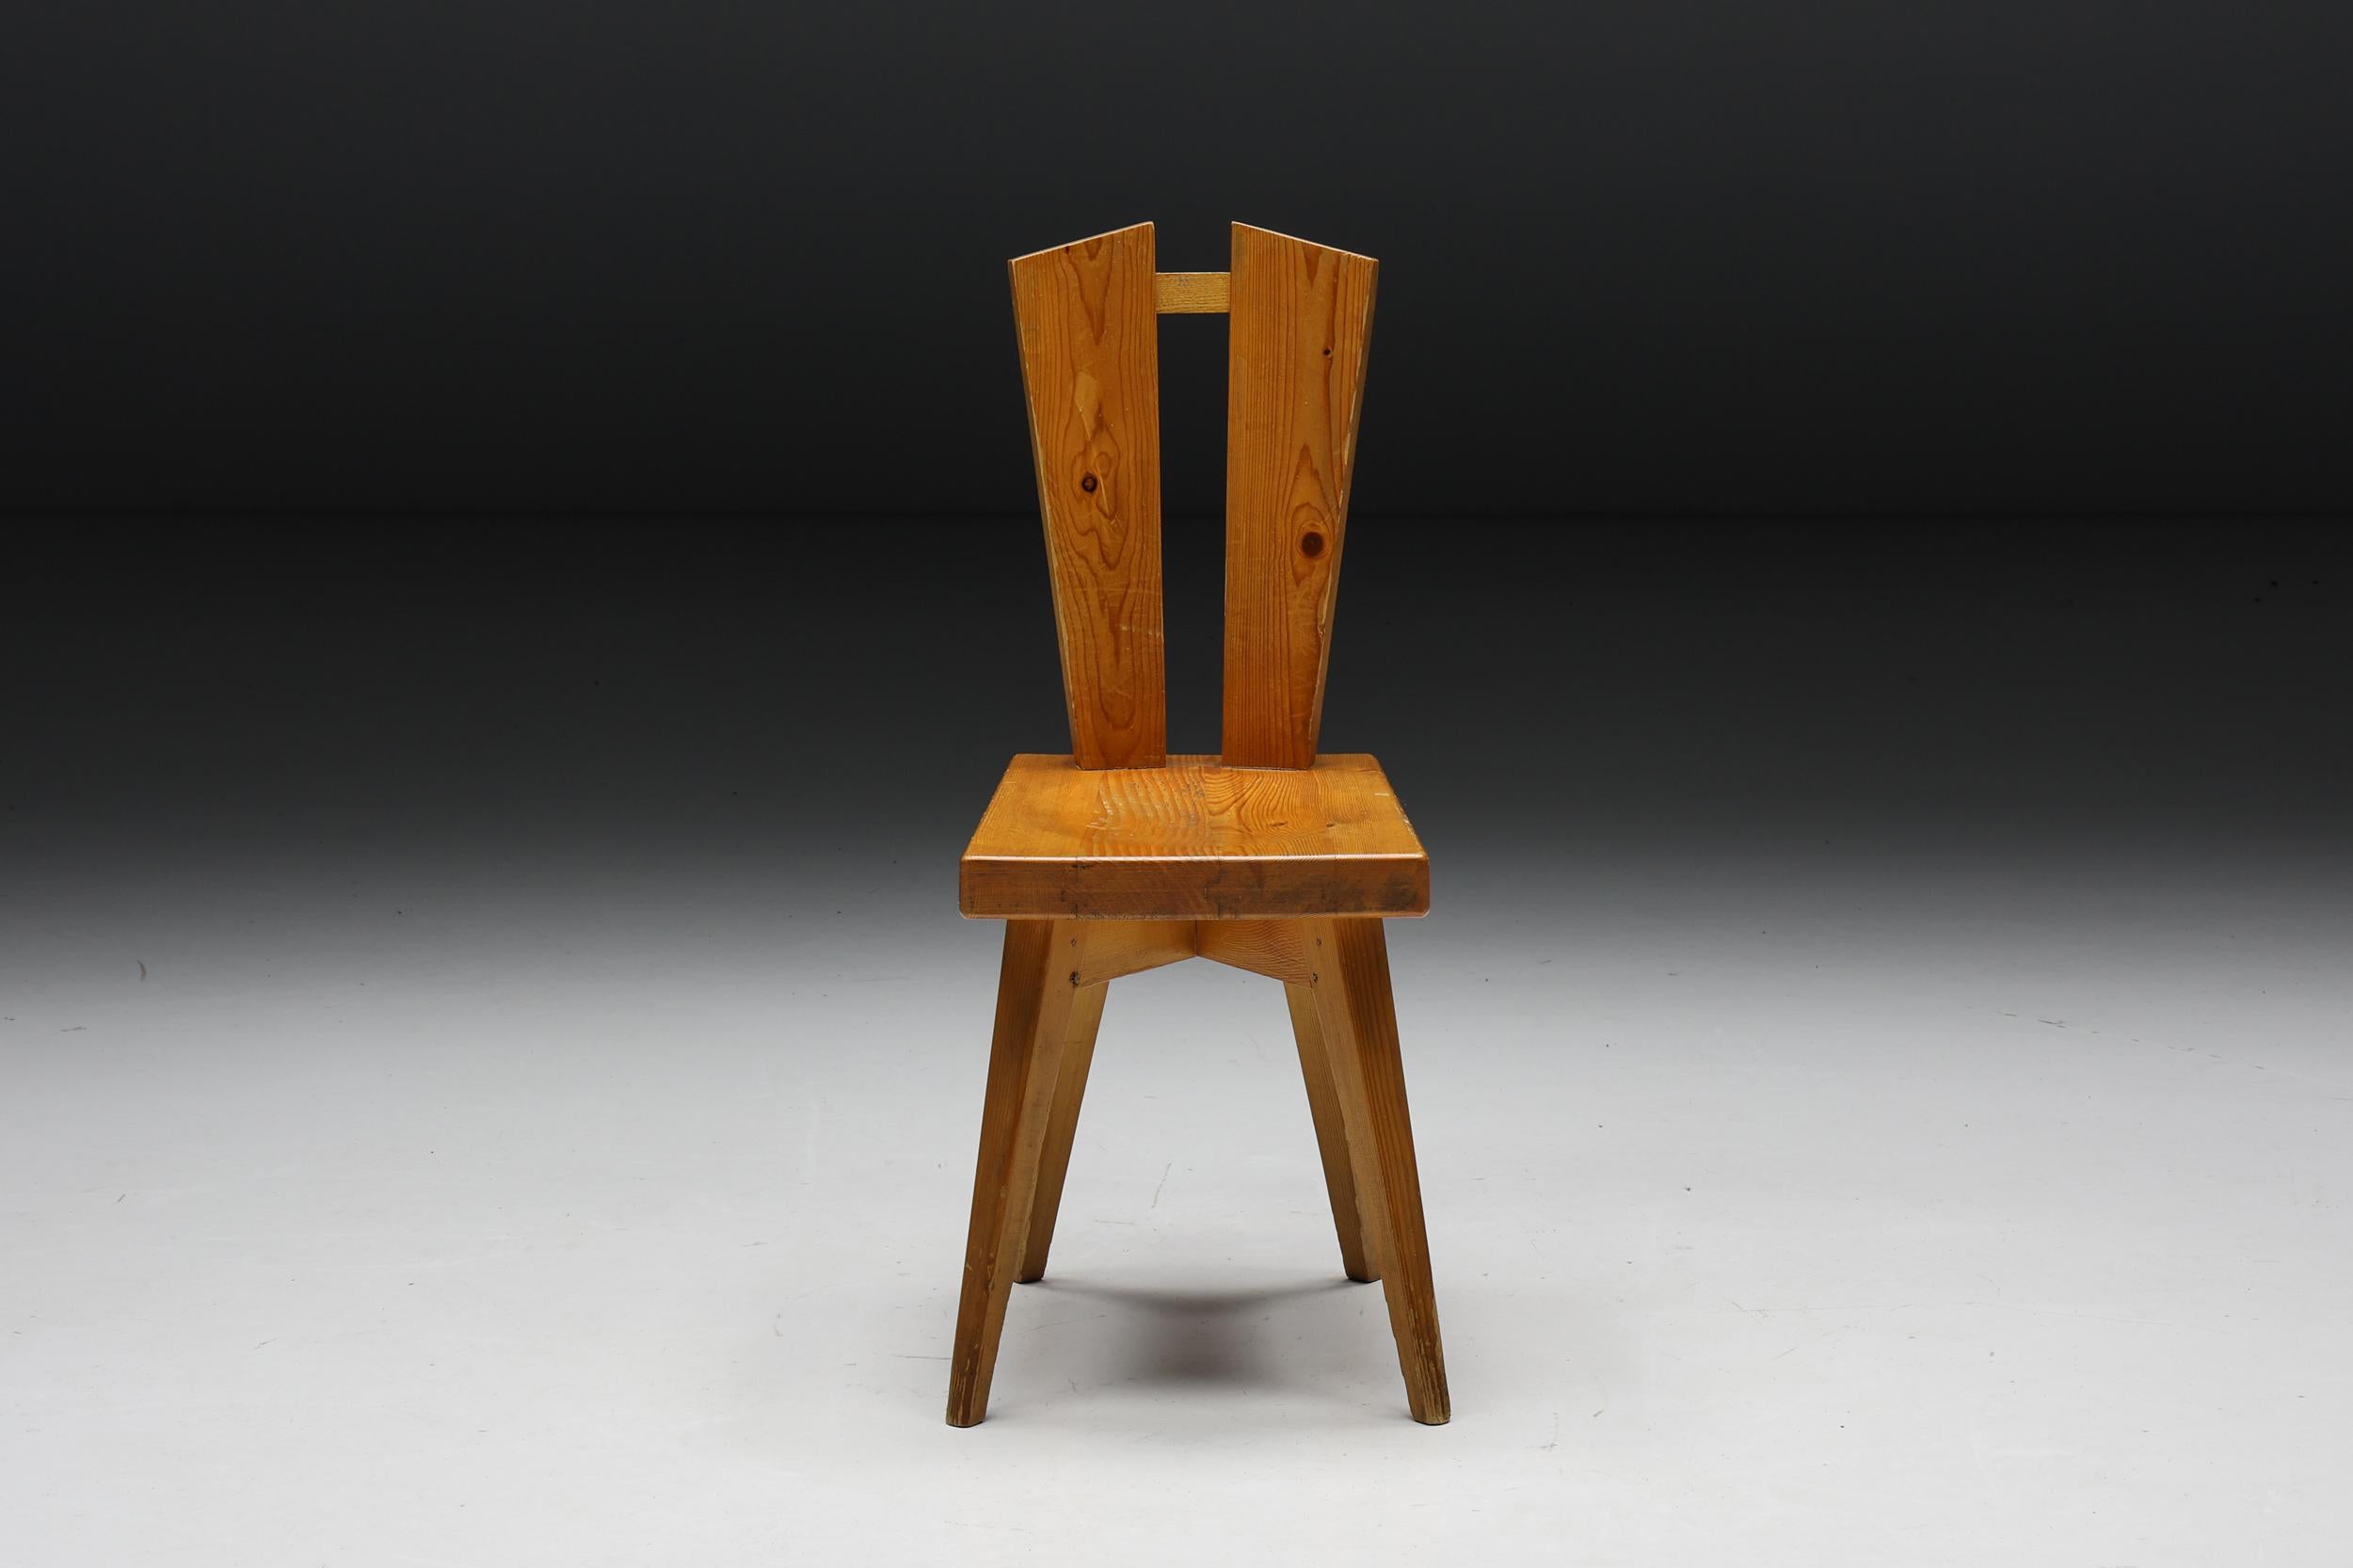 Dining chair in pine wood, a timeless masterpiece born from the collaboration between Christian Durupt and Charlotte Perriand in 1969. Crafted from exquisite pine wood, this striking chair was originally designed for the French ski resort of